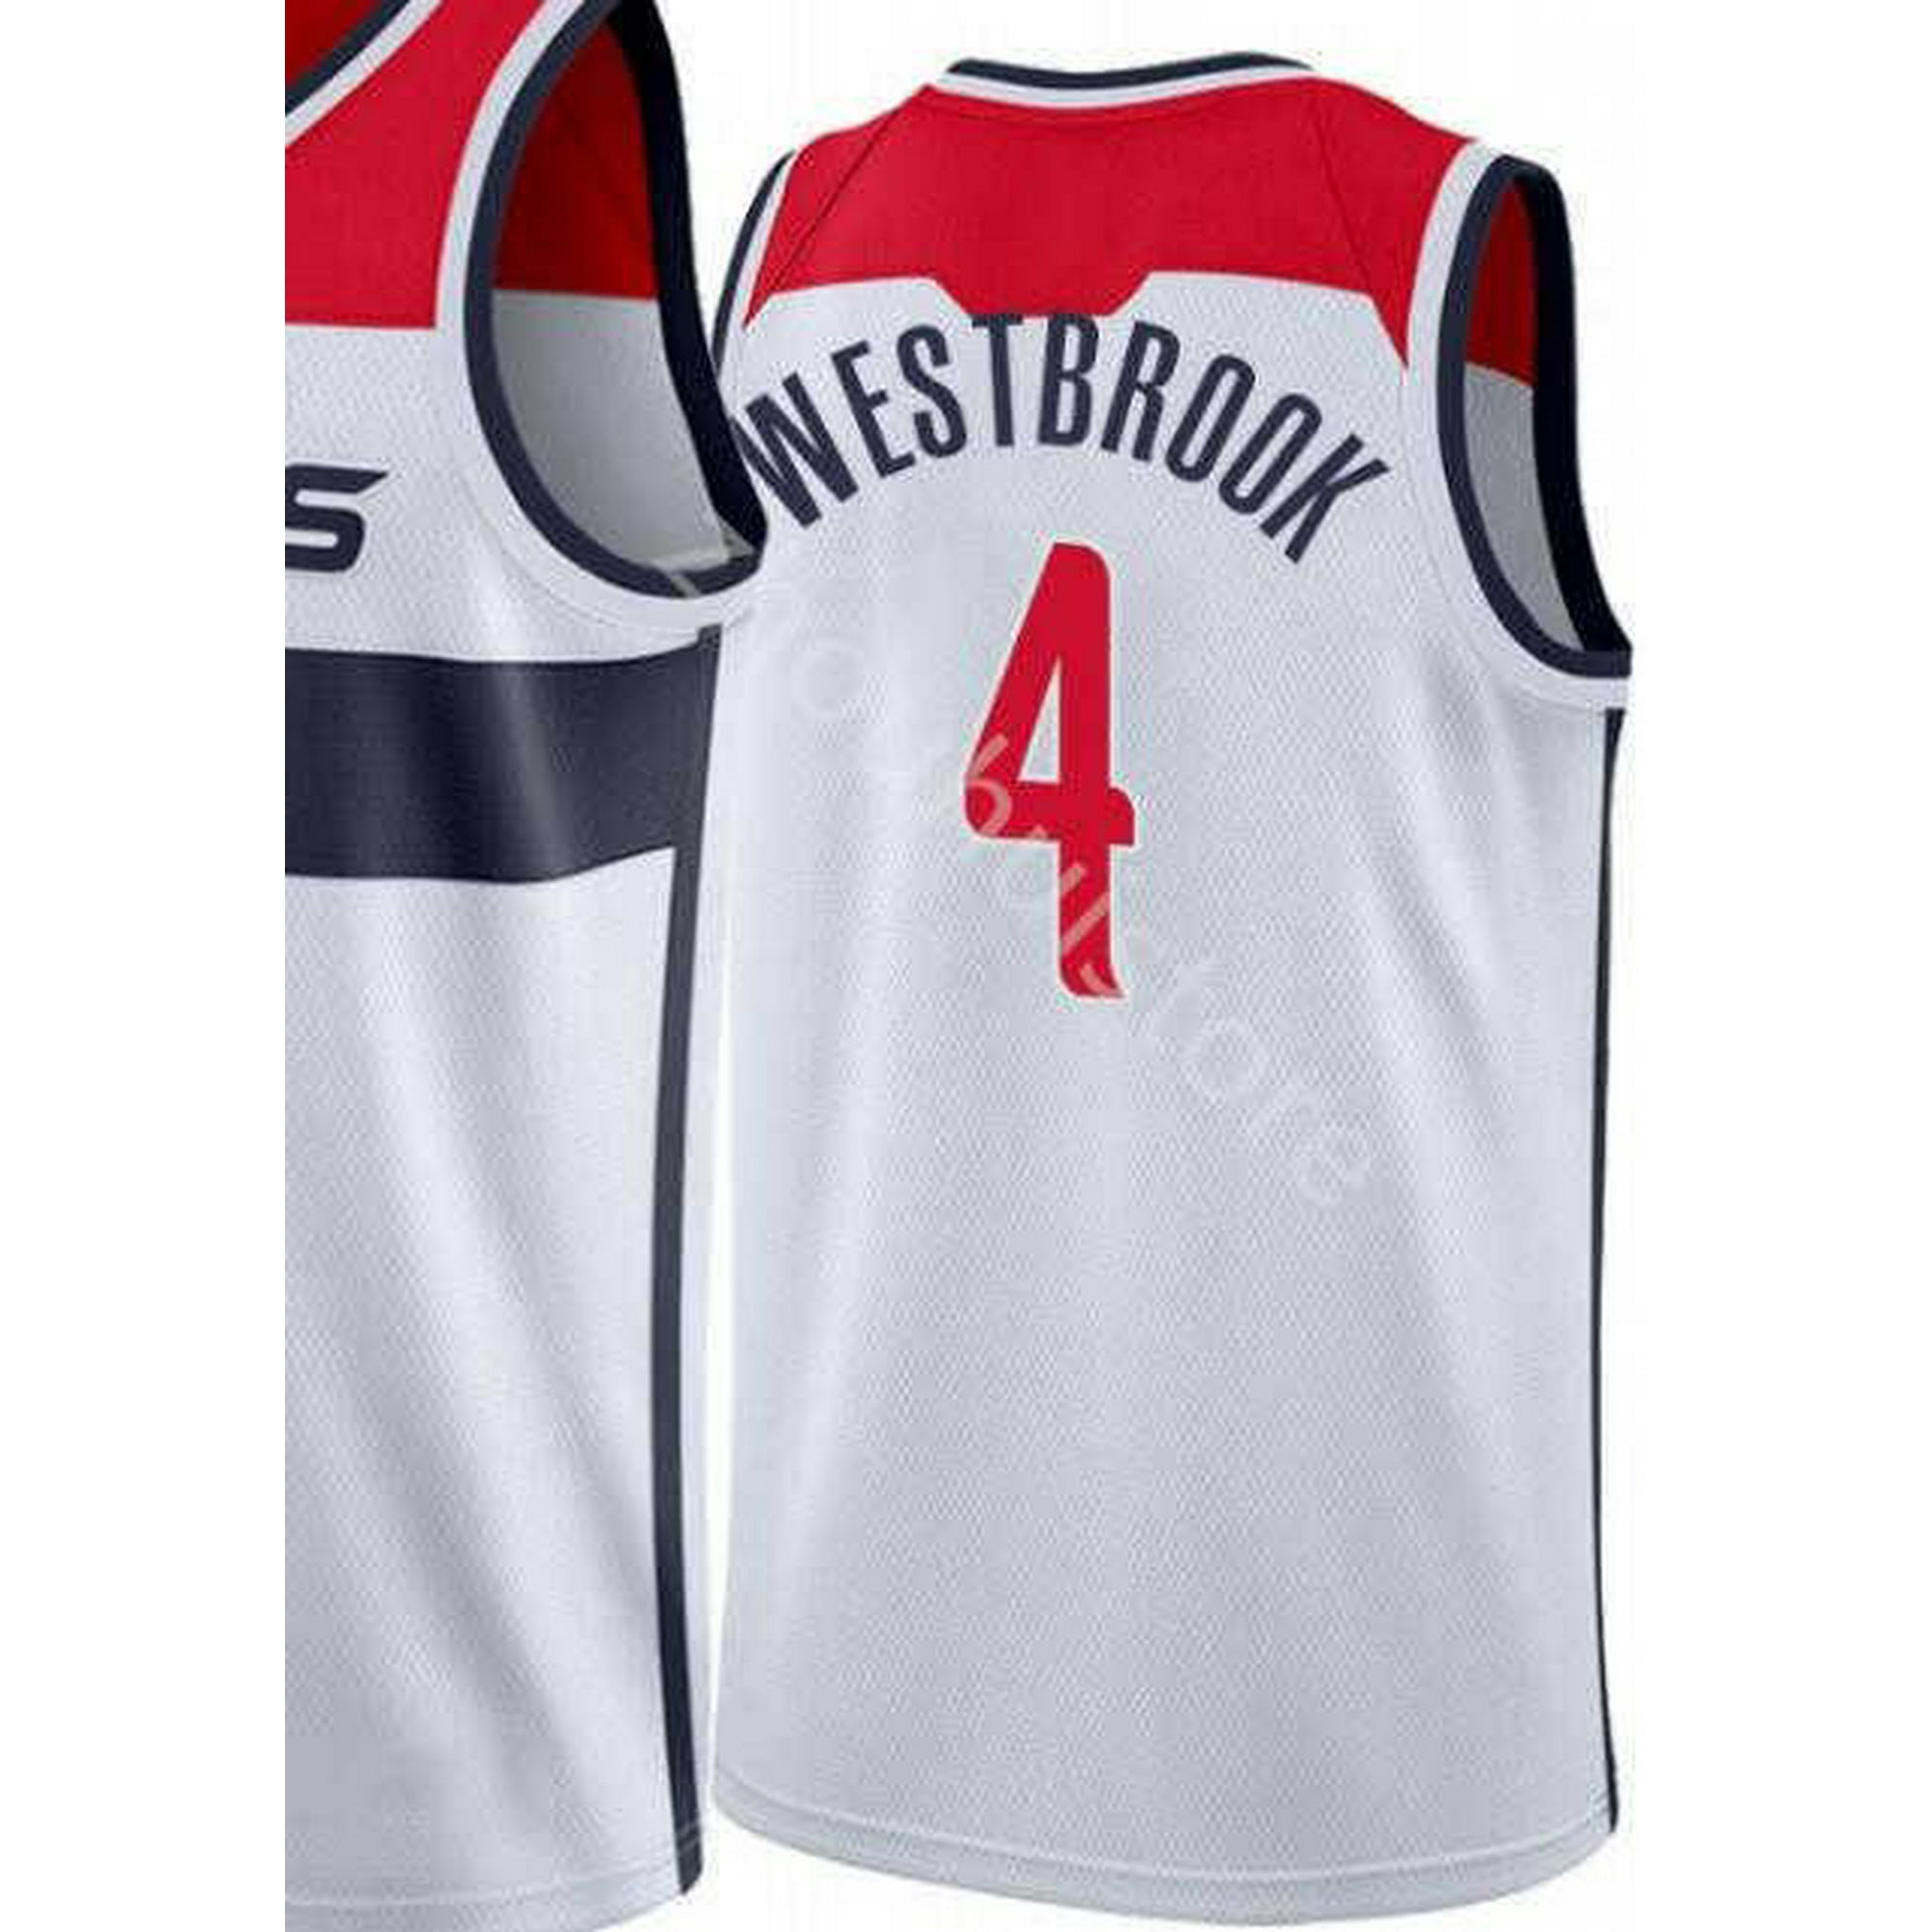 Cheap Sporting clothes and Official NBA Jerseys 2021 for Men and